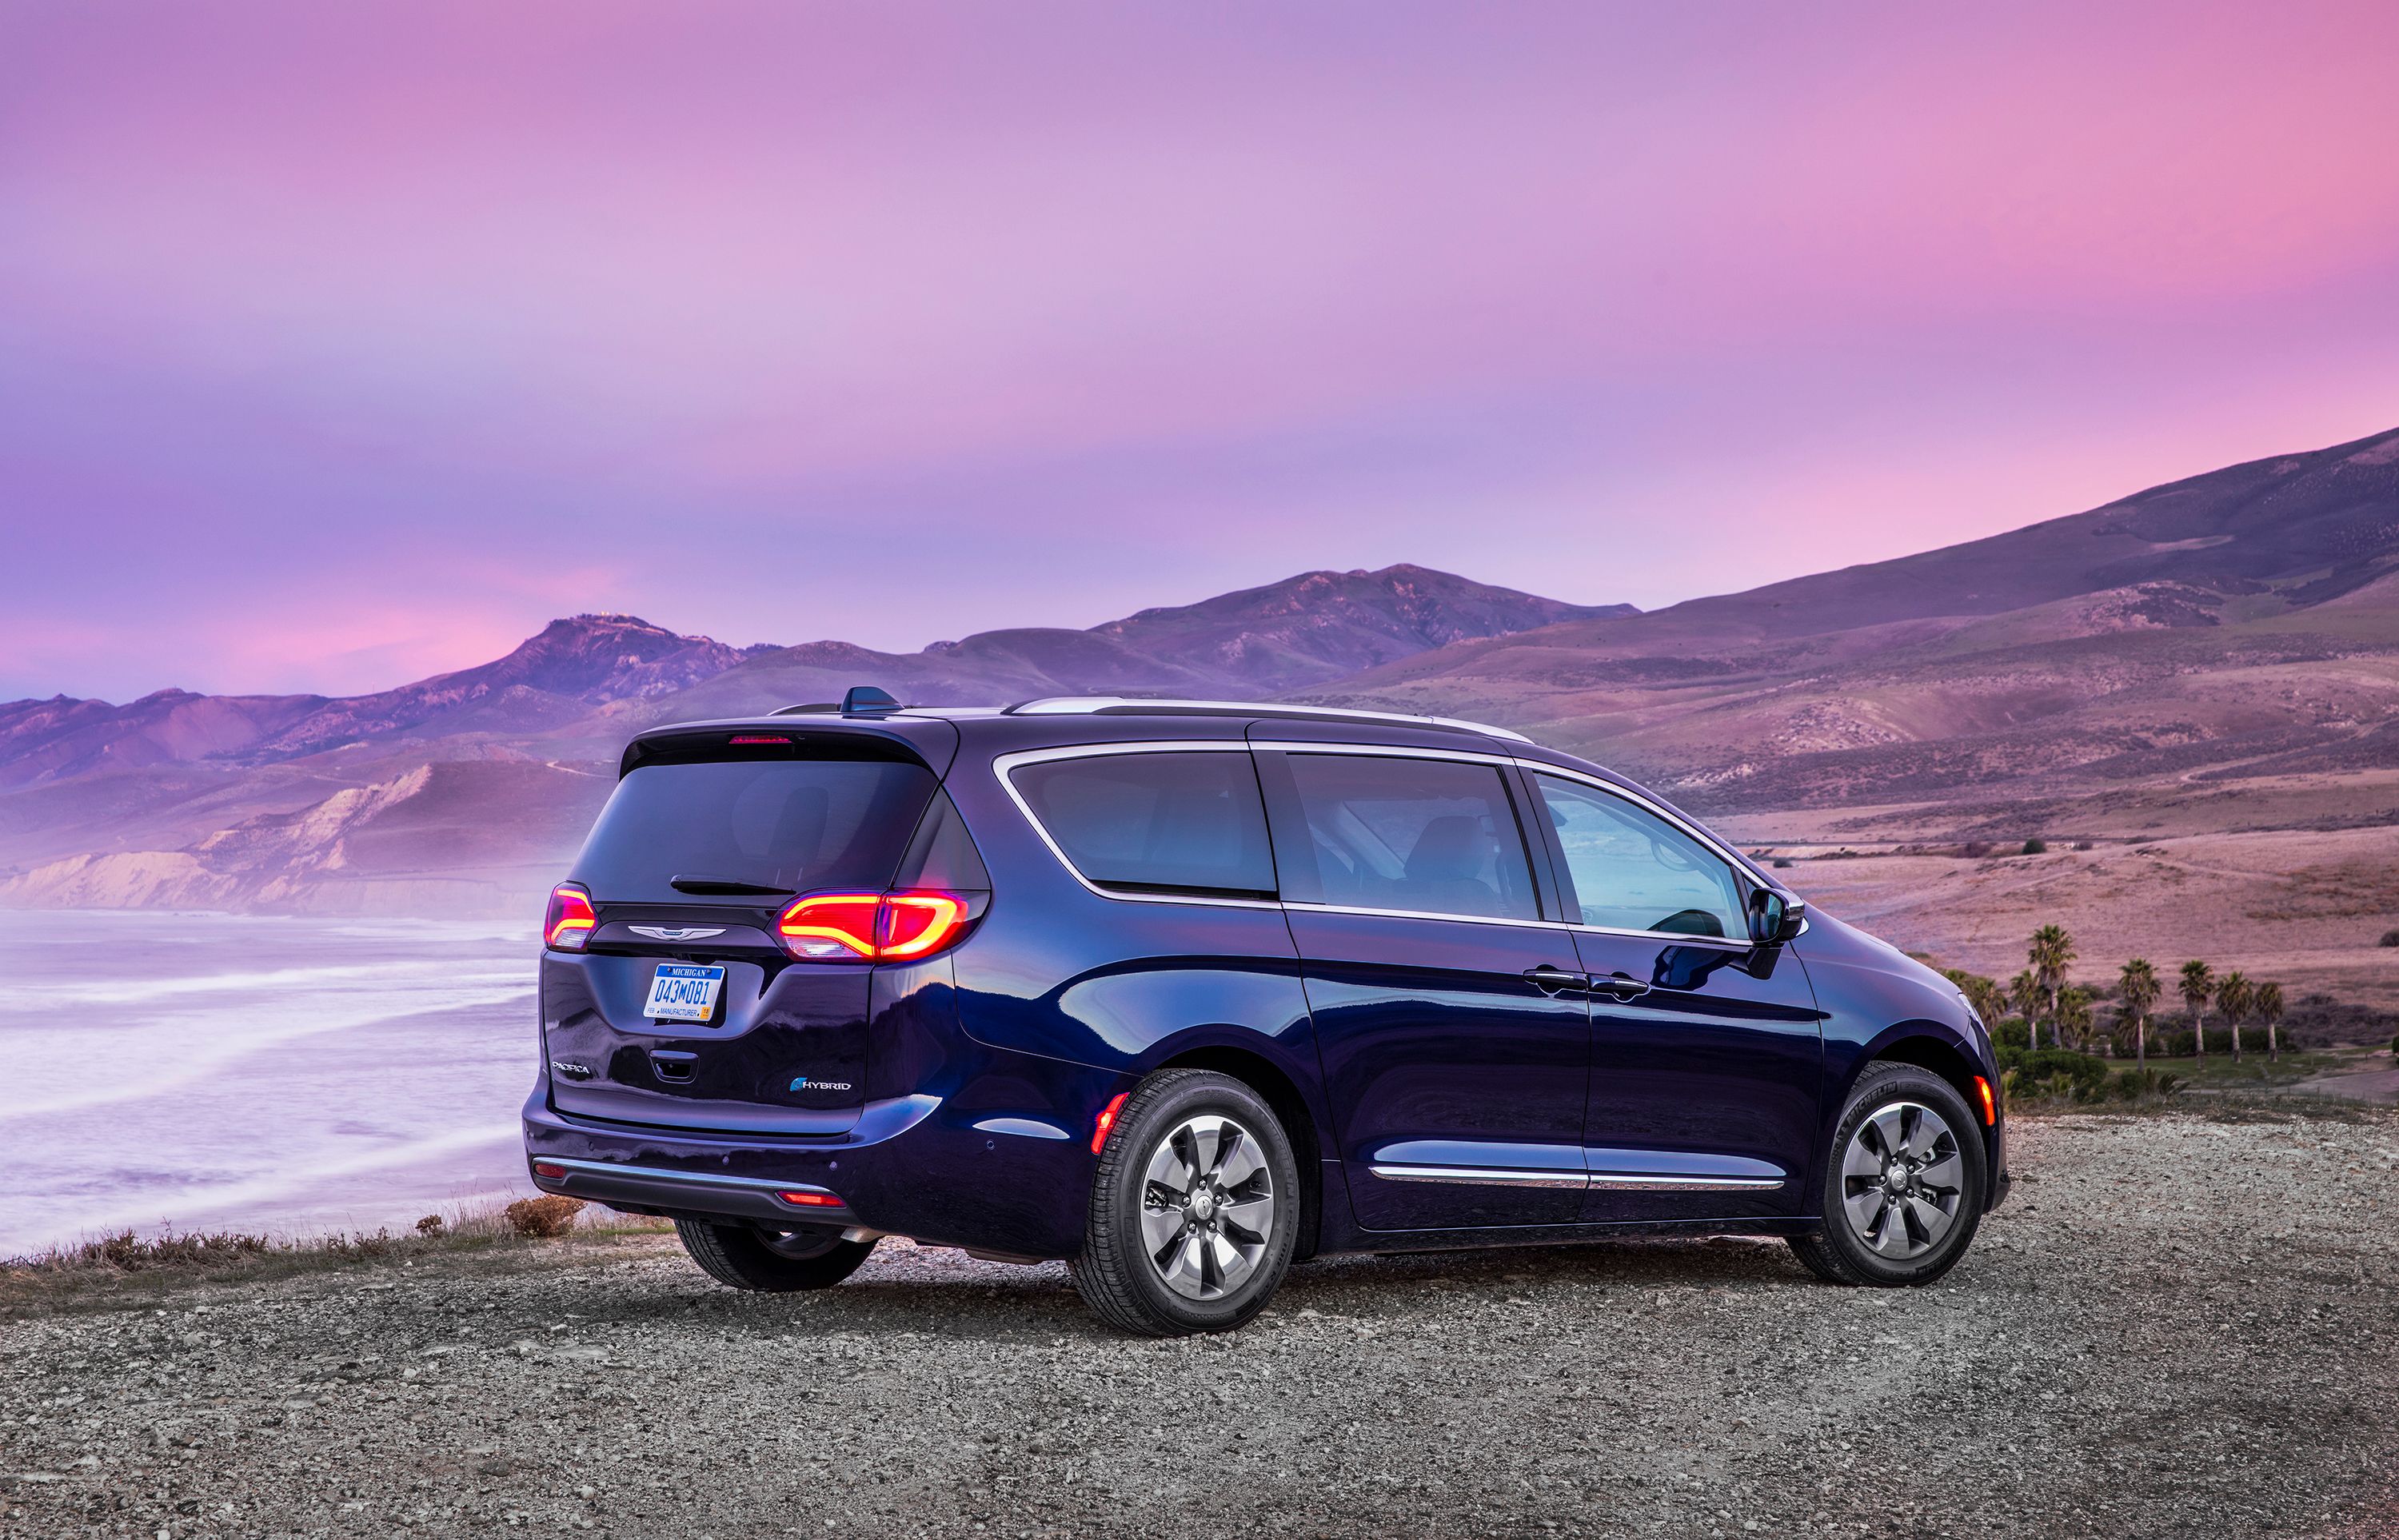 Wallpapers Chrysler Pacifica Hybrid machine view from behind on the desktop